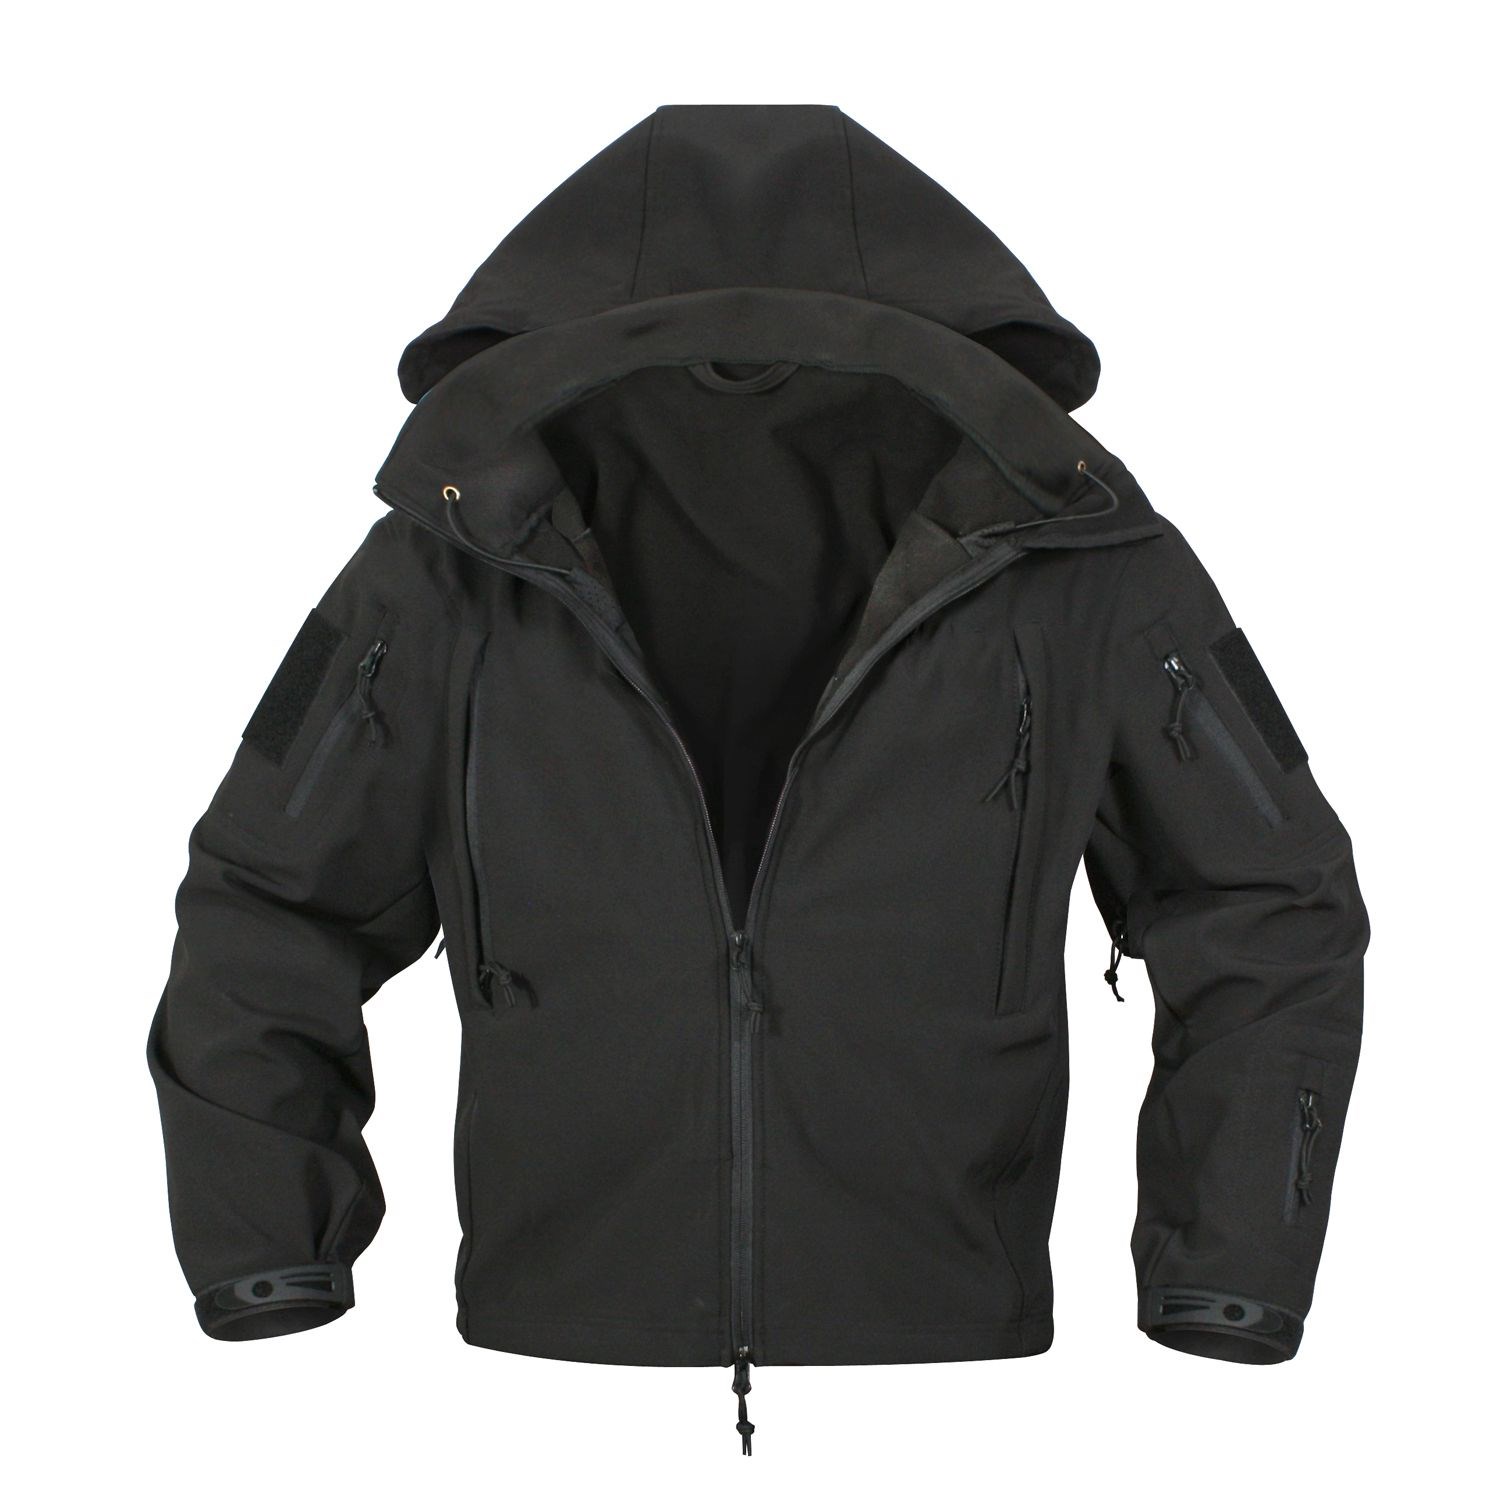 Spec Ops Soft Shell Security Jacket BLACK ROTHCO 97670 L-11